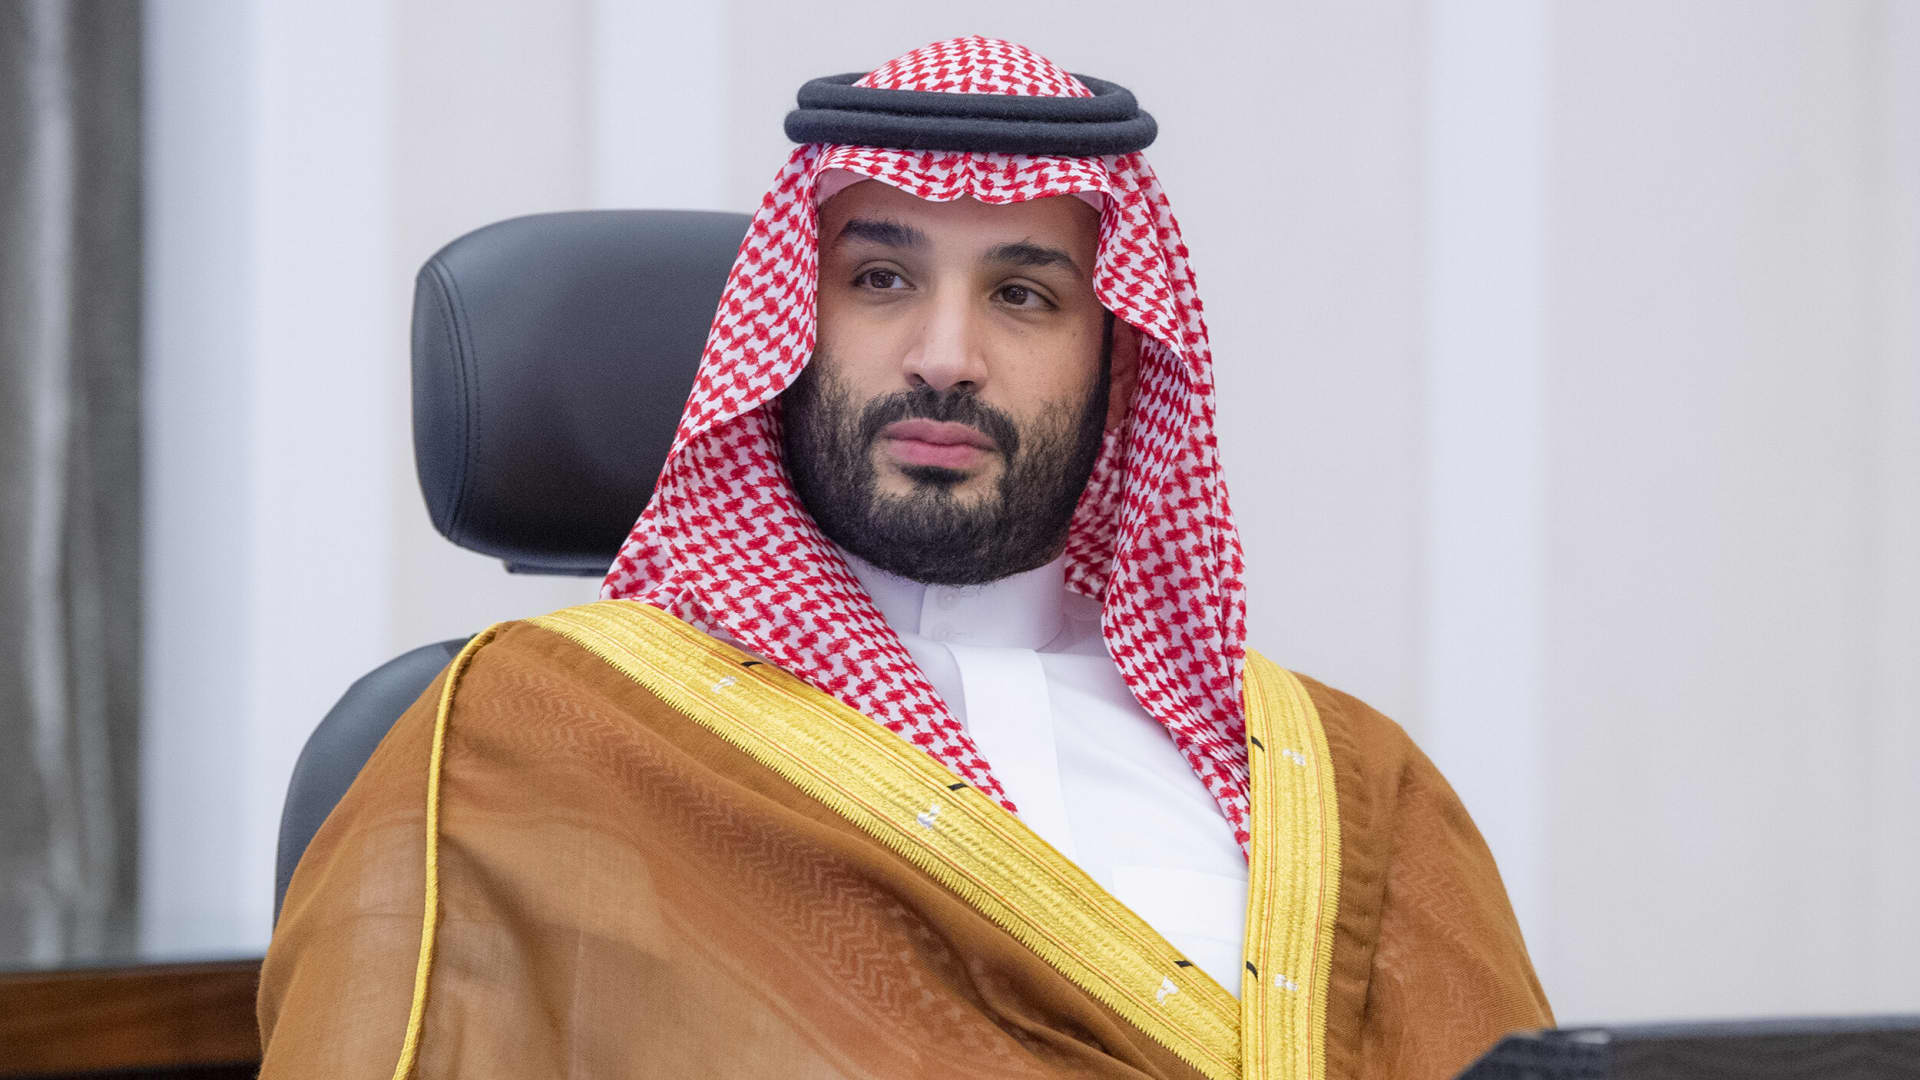 ‘I don’t care’: ‘Sportswashing’ comments from Saudi crown prince spark anger from rights groups